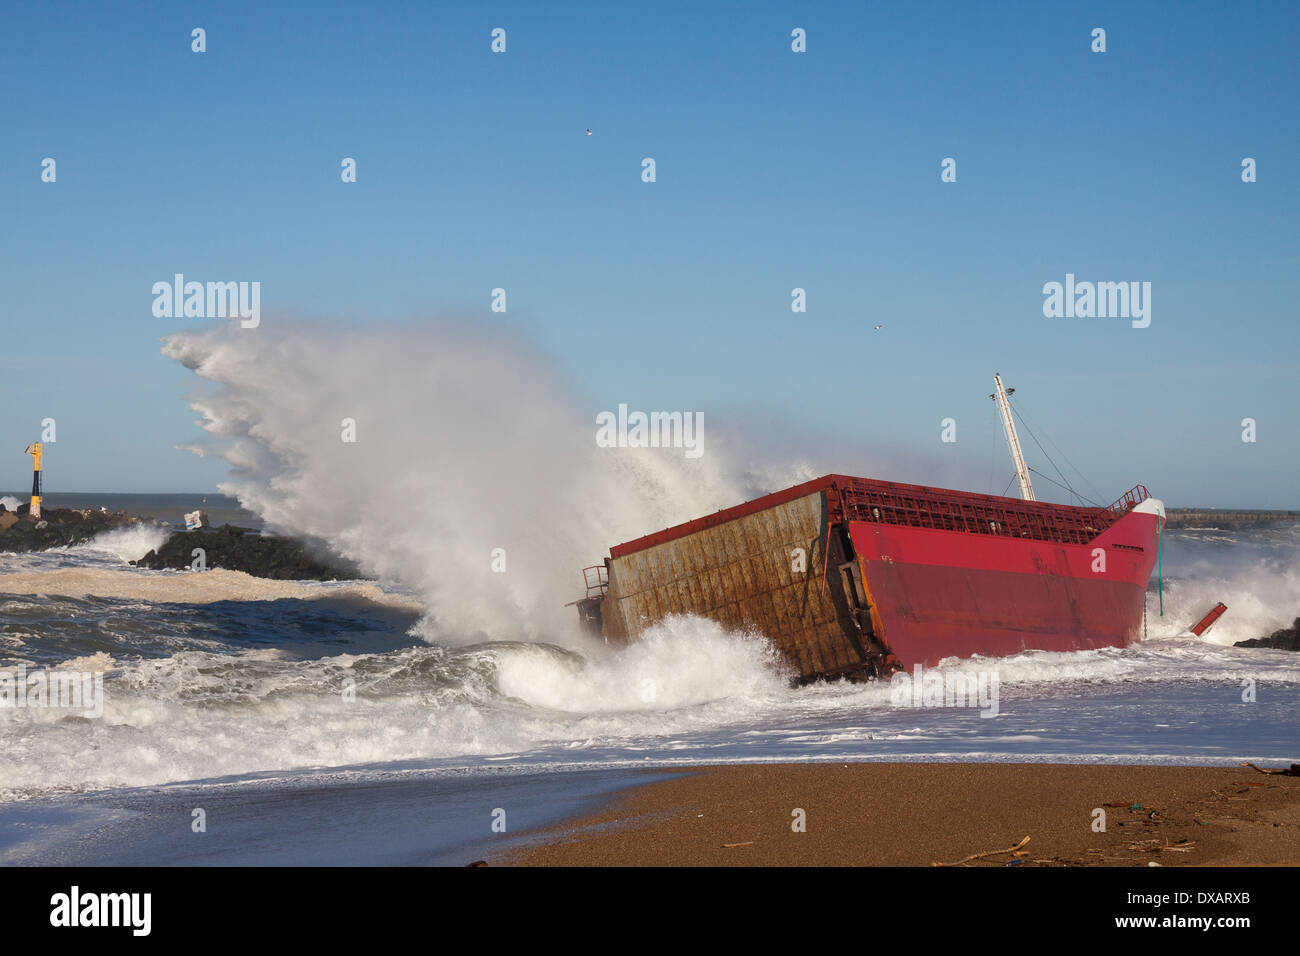 "Luno" naufrage, plage des Cavaliers, Anglet, France. Banque D'Images